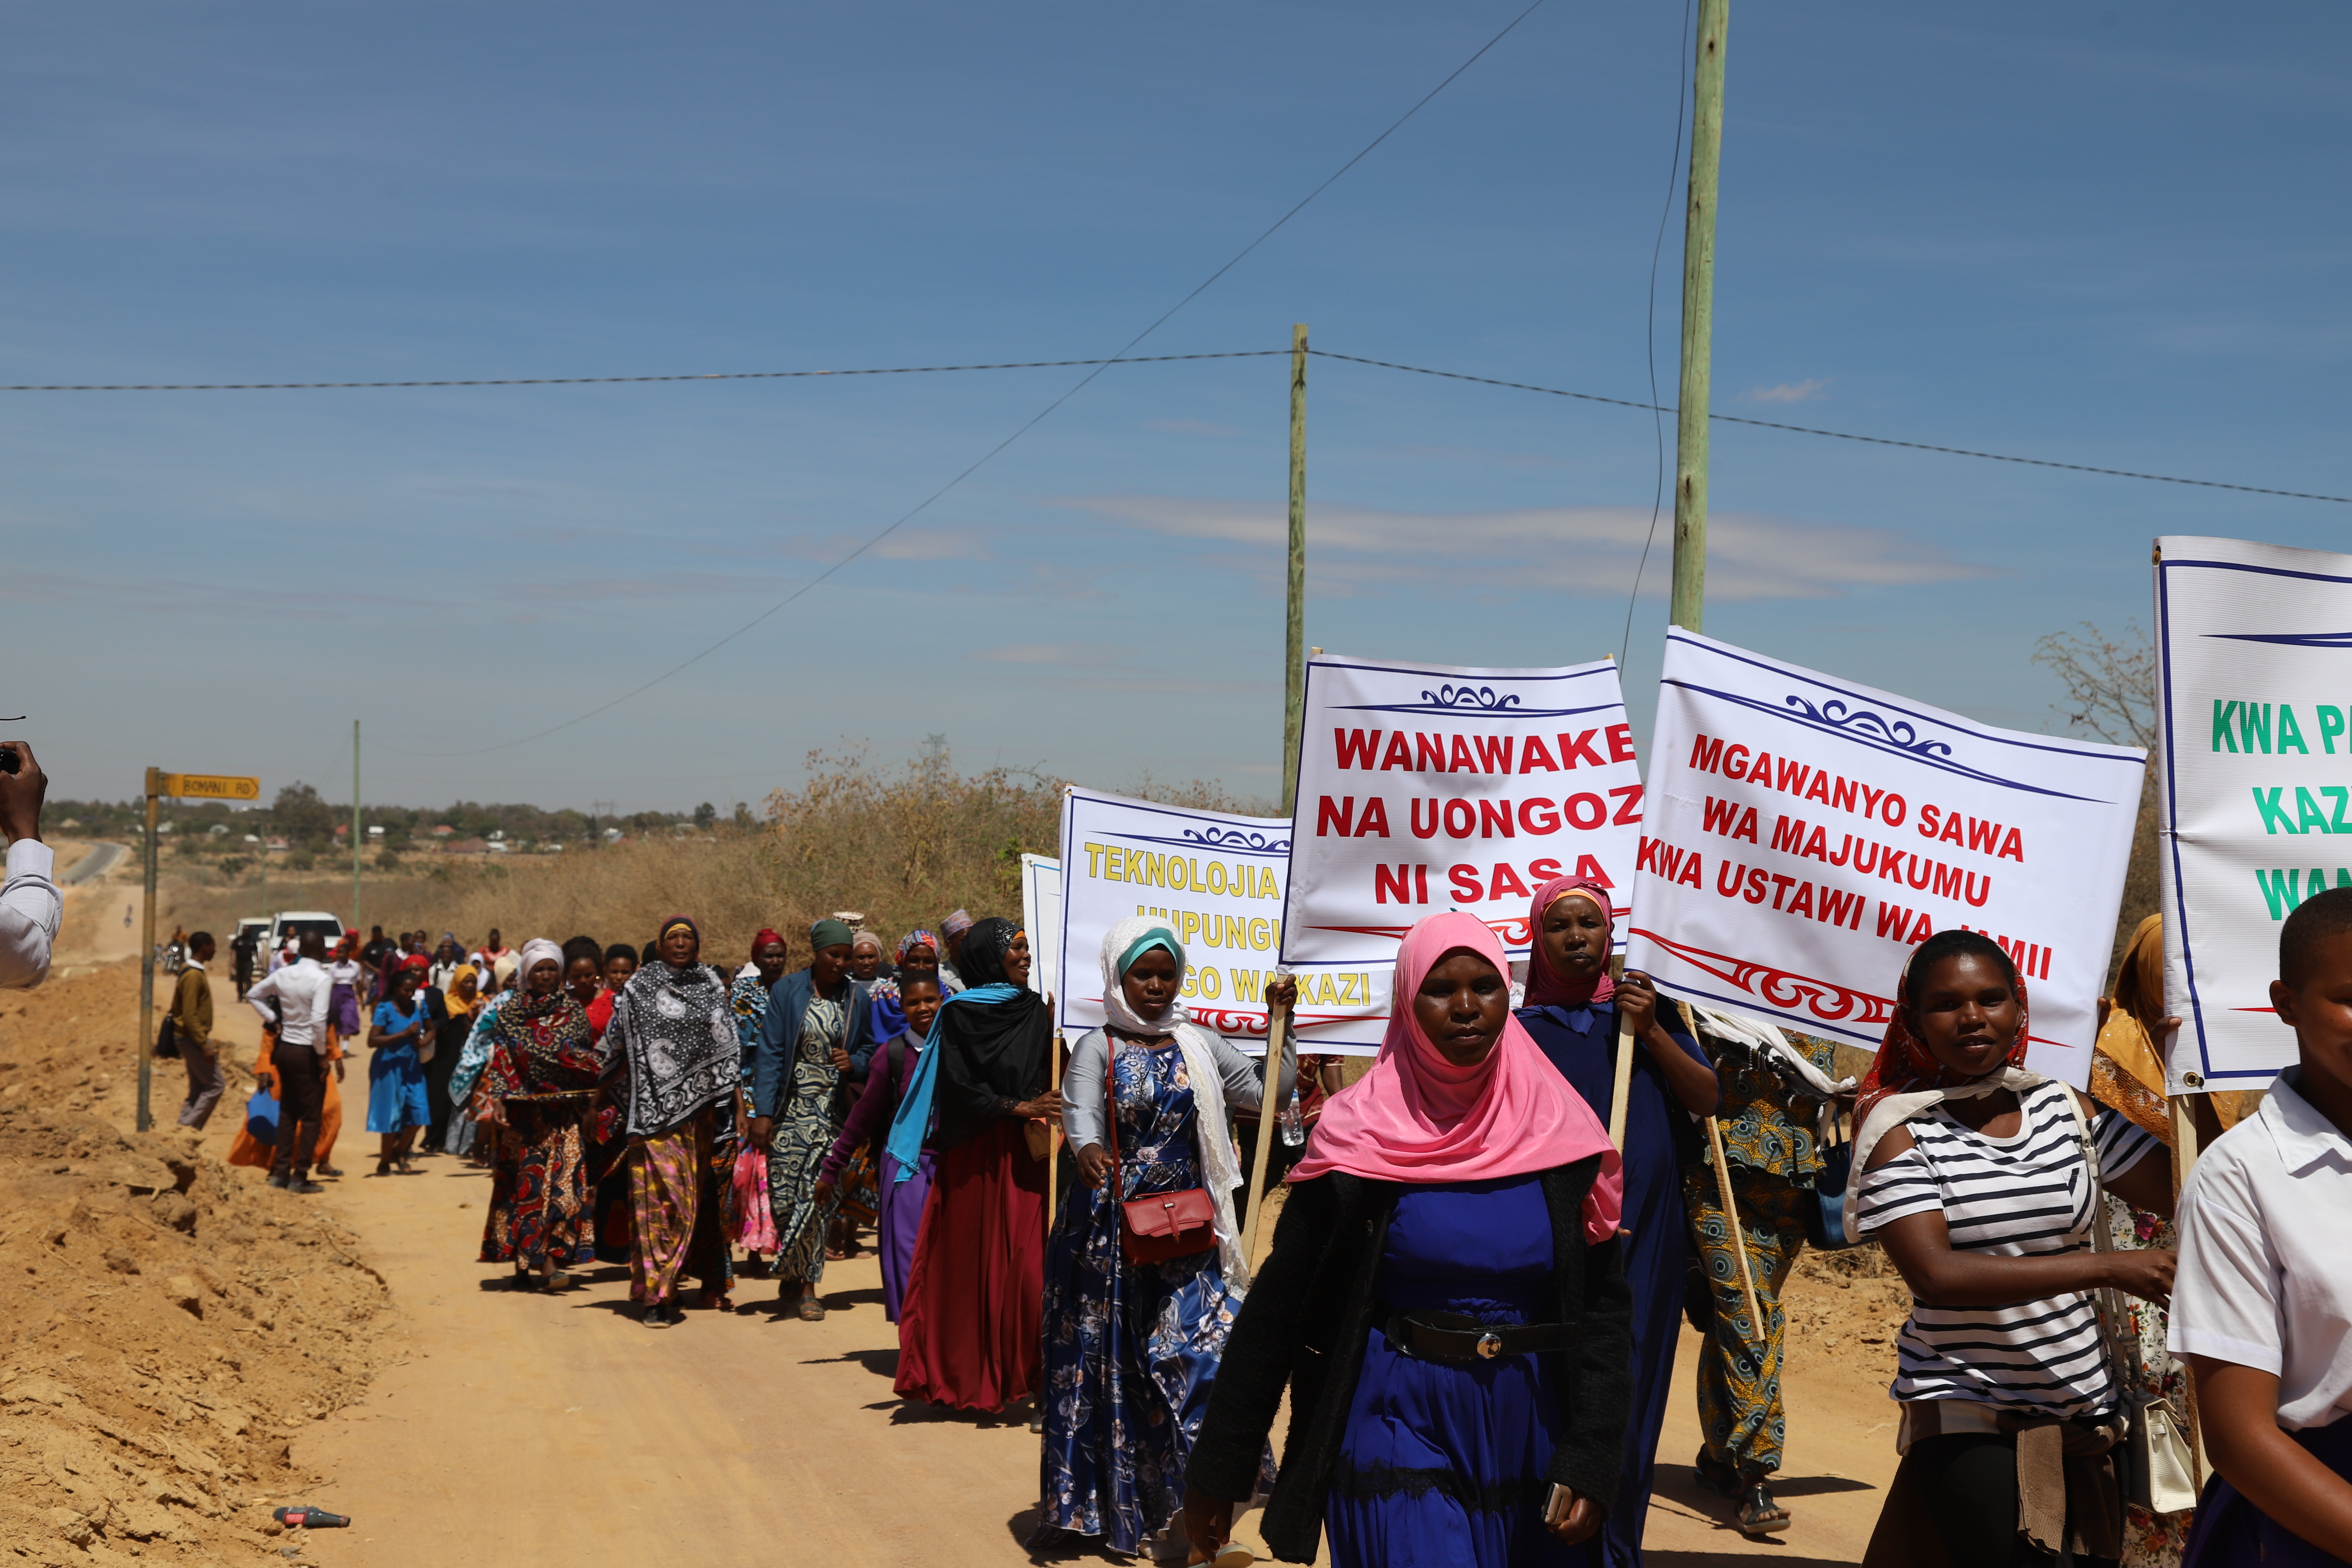 Women marching in the Singida region of Tanzania as a part of celebrations for the International Day of Care and Support